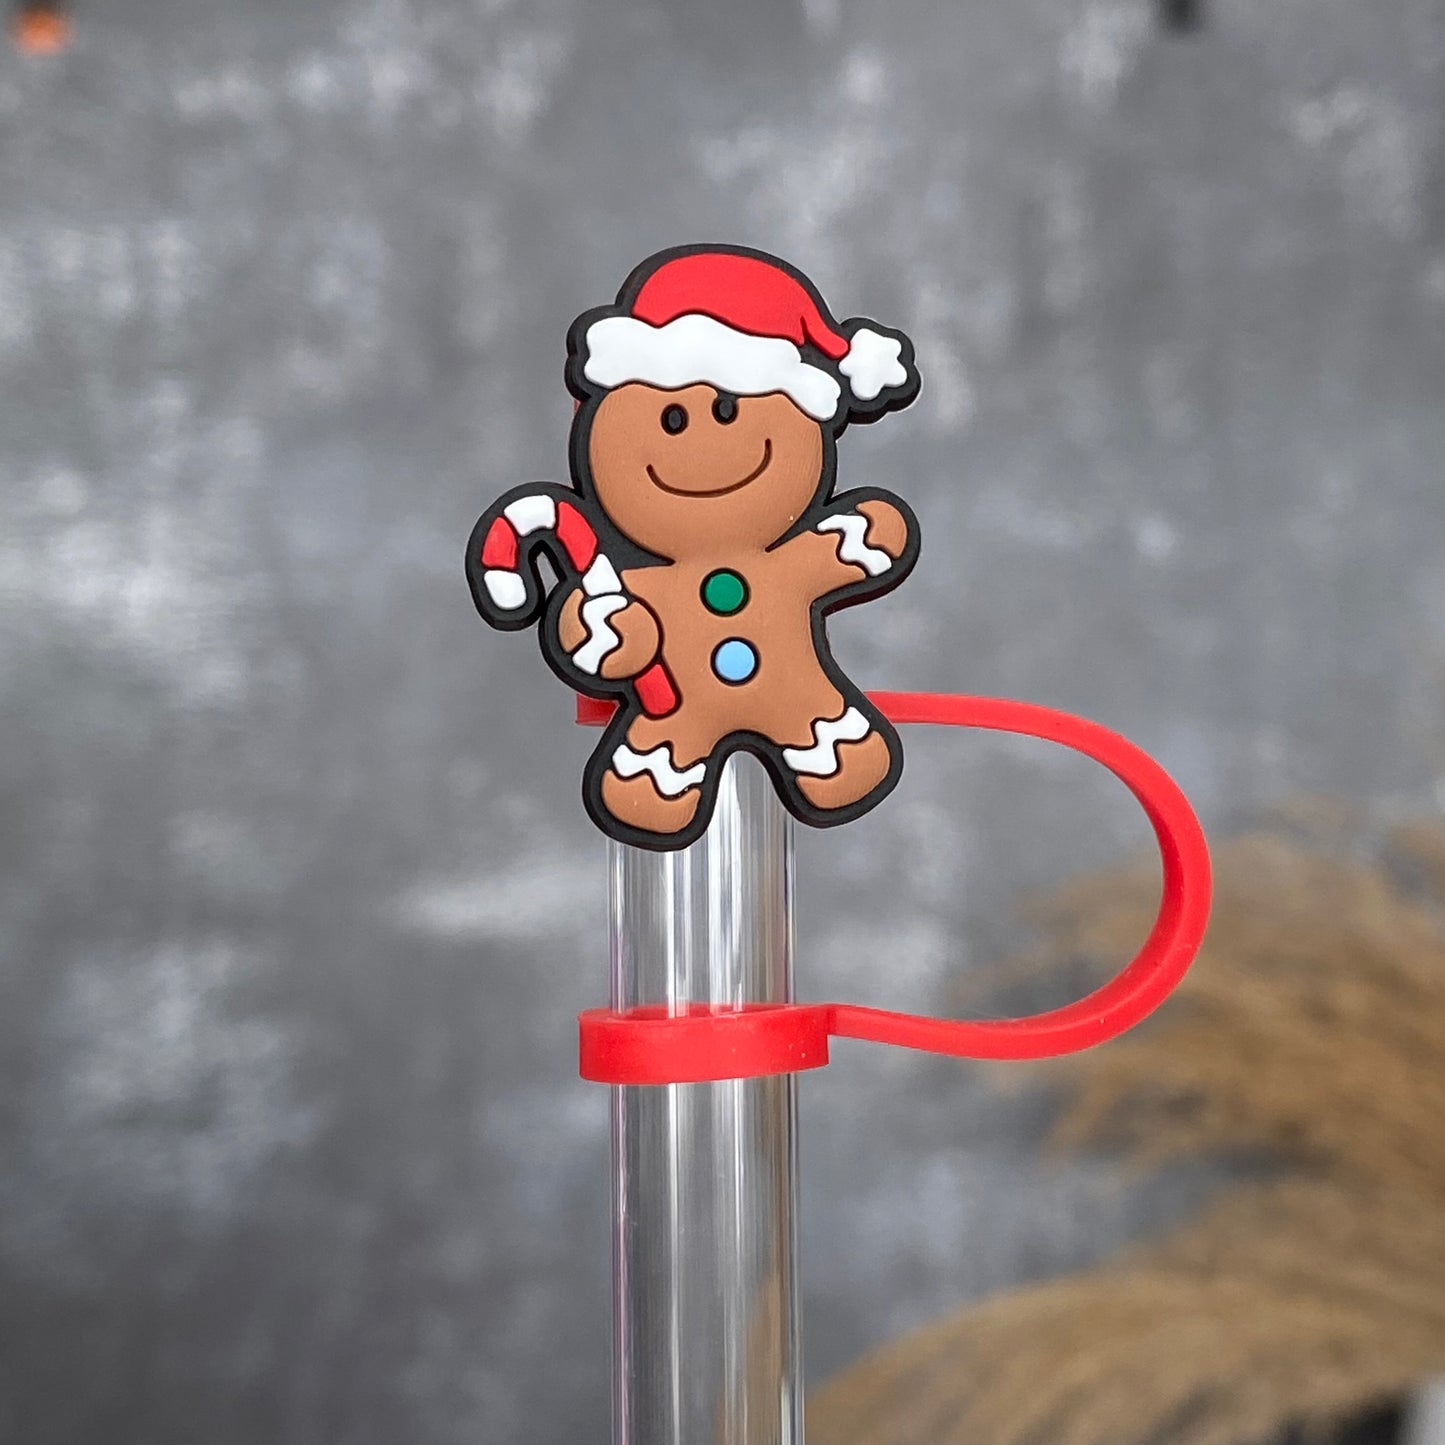 Gingerbread Christmas Holiday Reusable Straws – Emerson and Friends